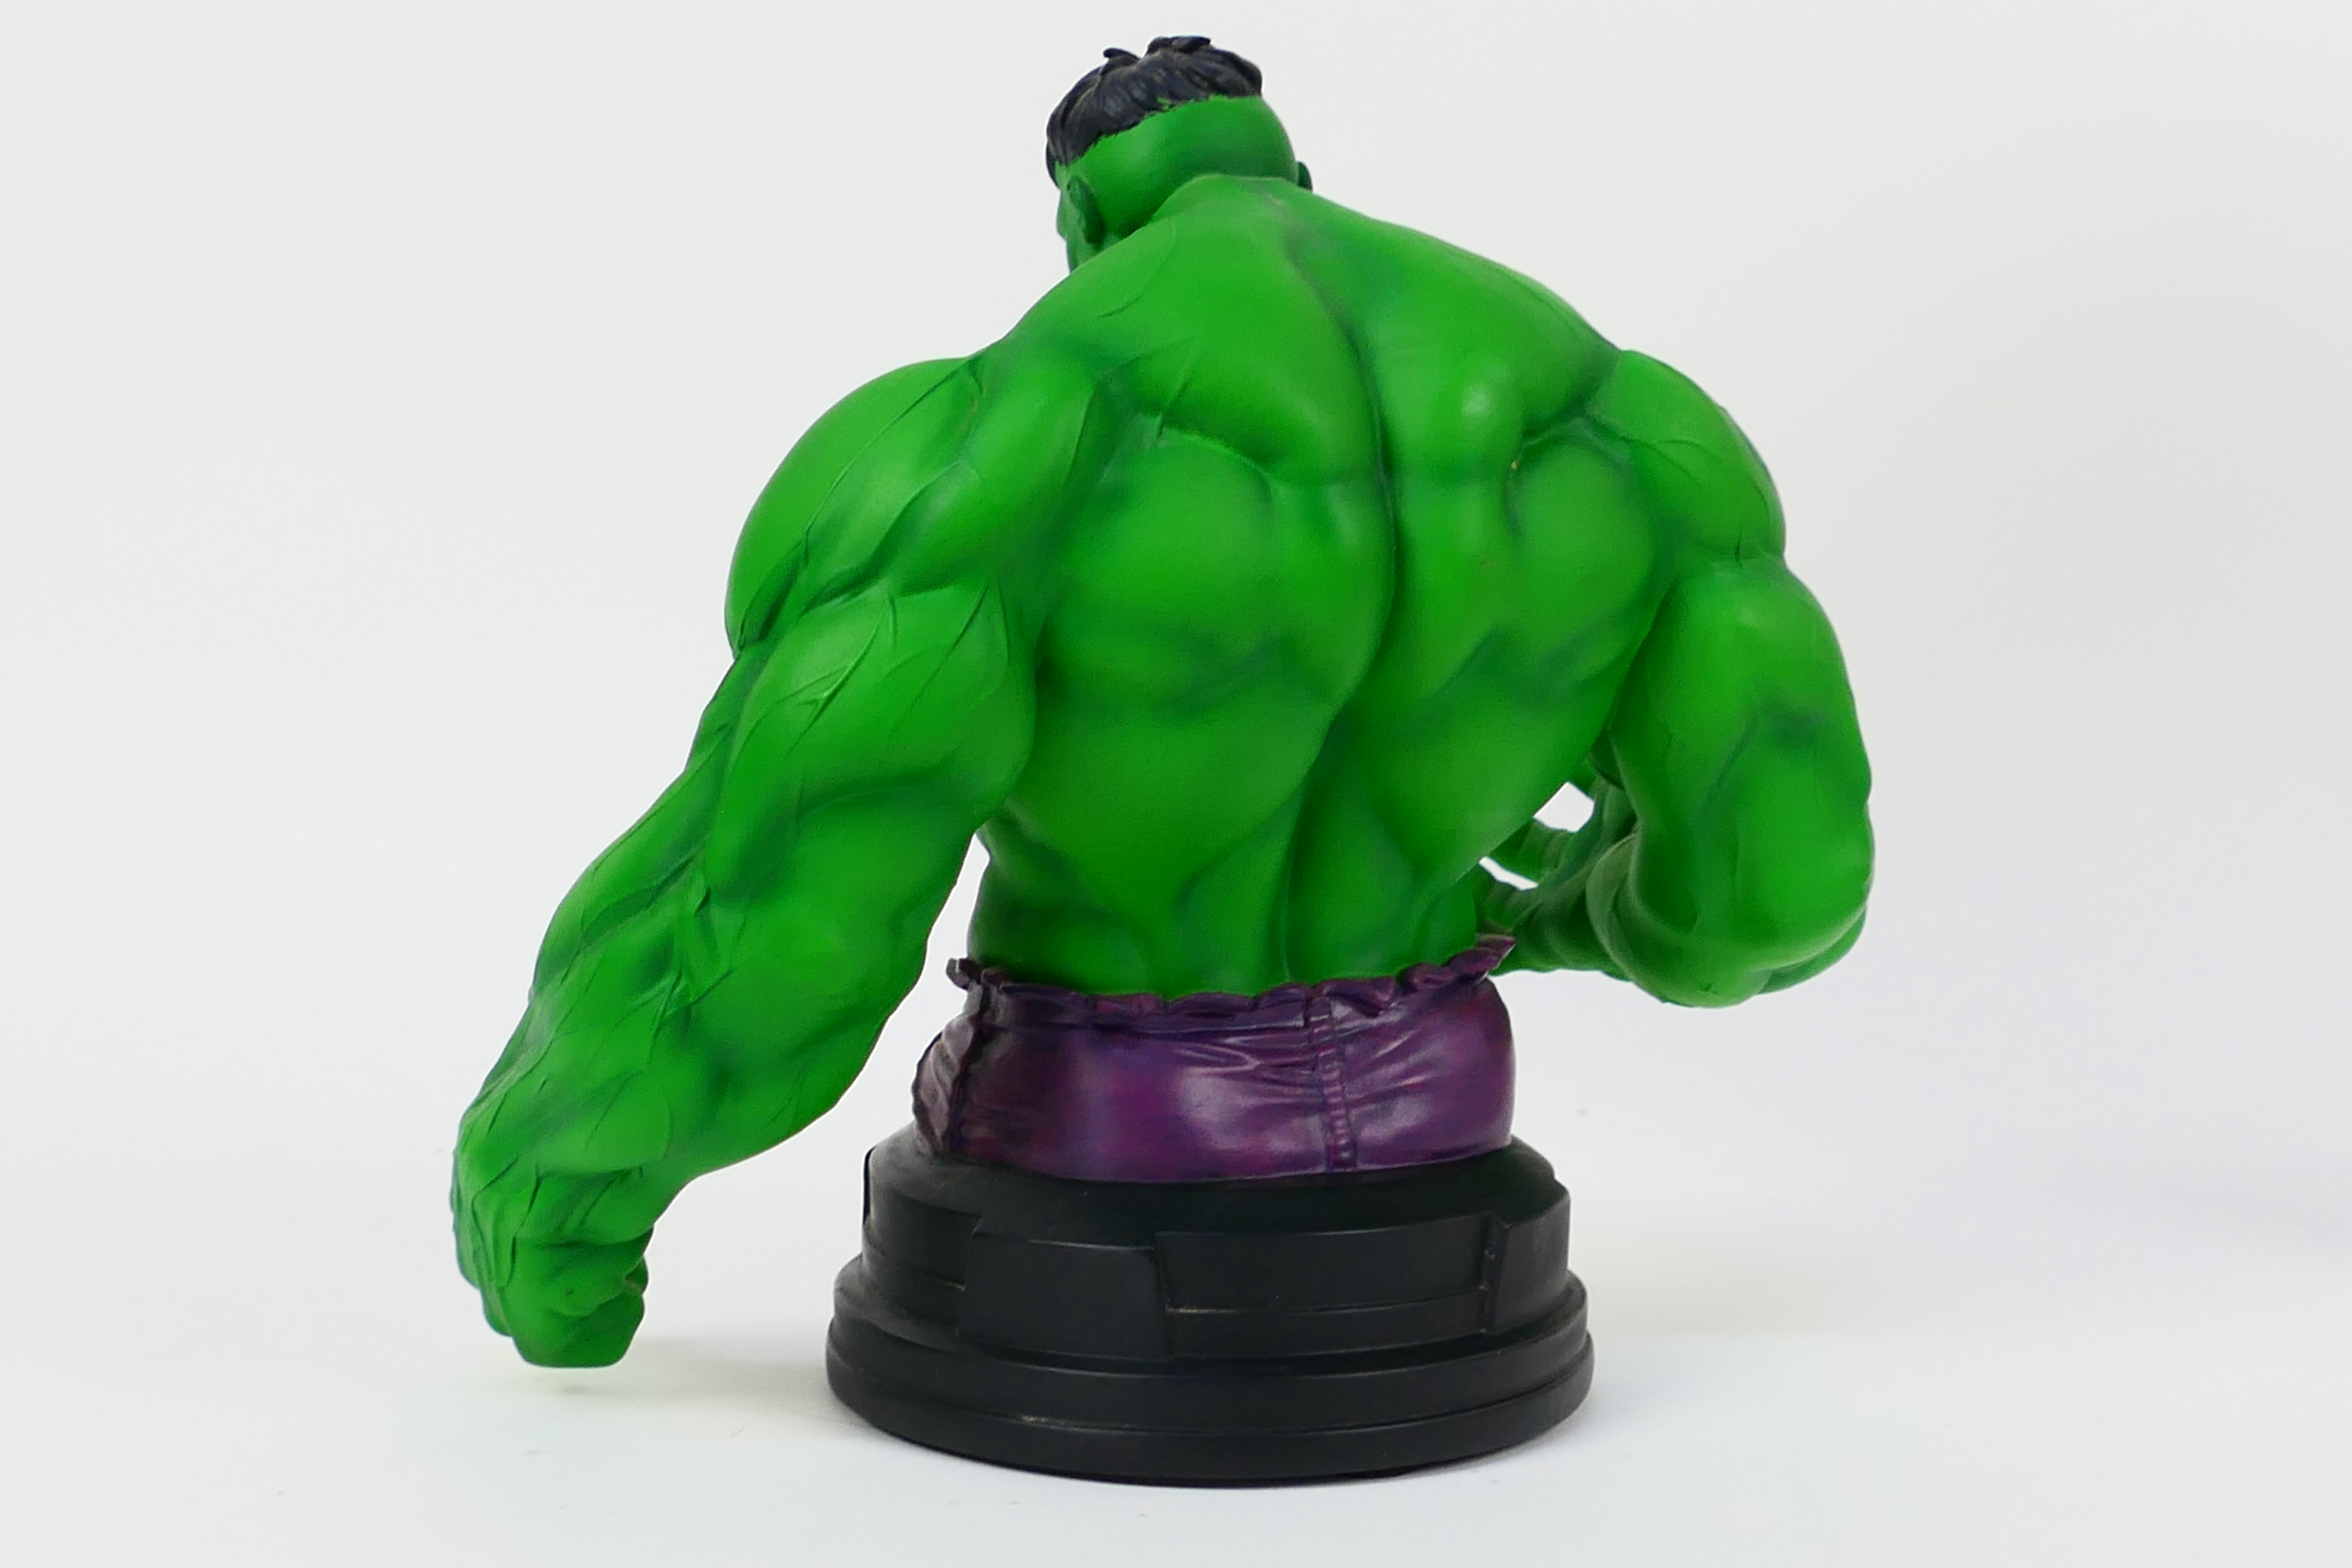 Gentle Giant Ltd - Marvel - A limited edition The Incredible Hulk 7.5 inch mini bust. - Image 4 of 6